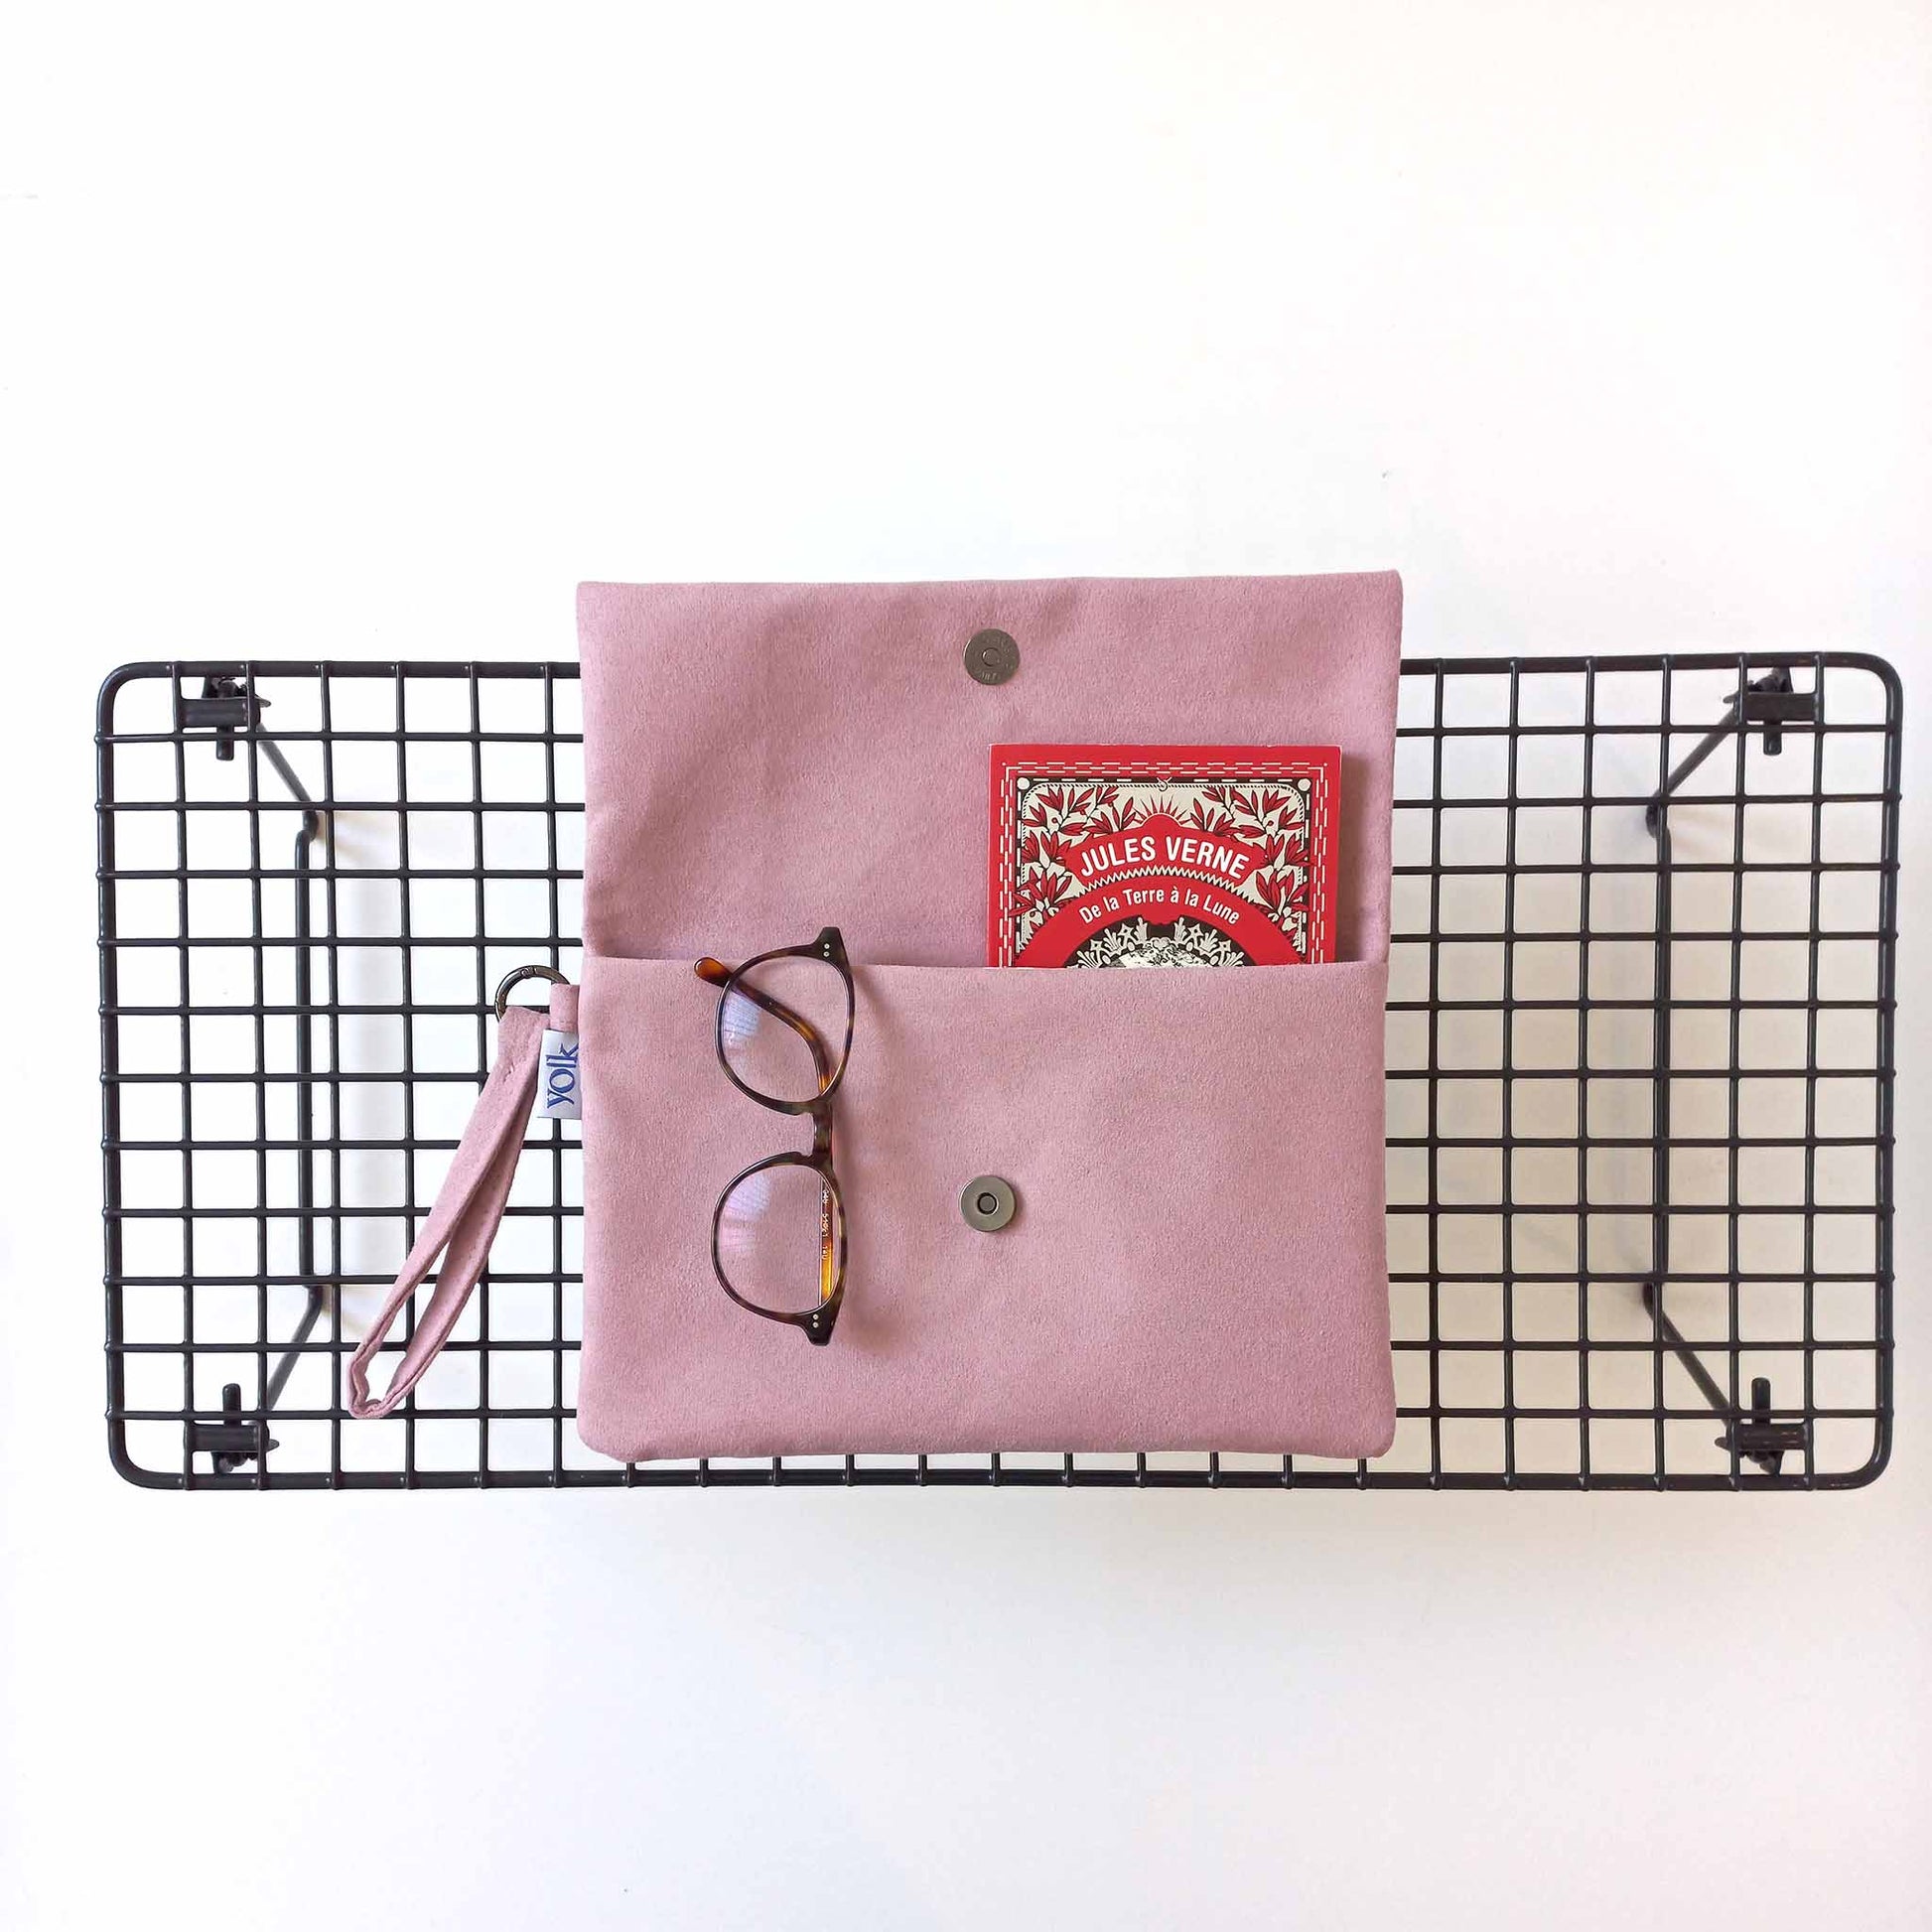 A soft suede pink clutch with a book and glasses